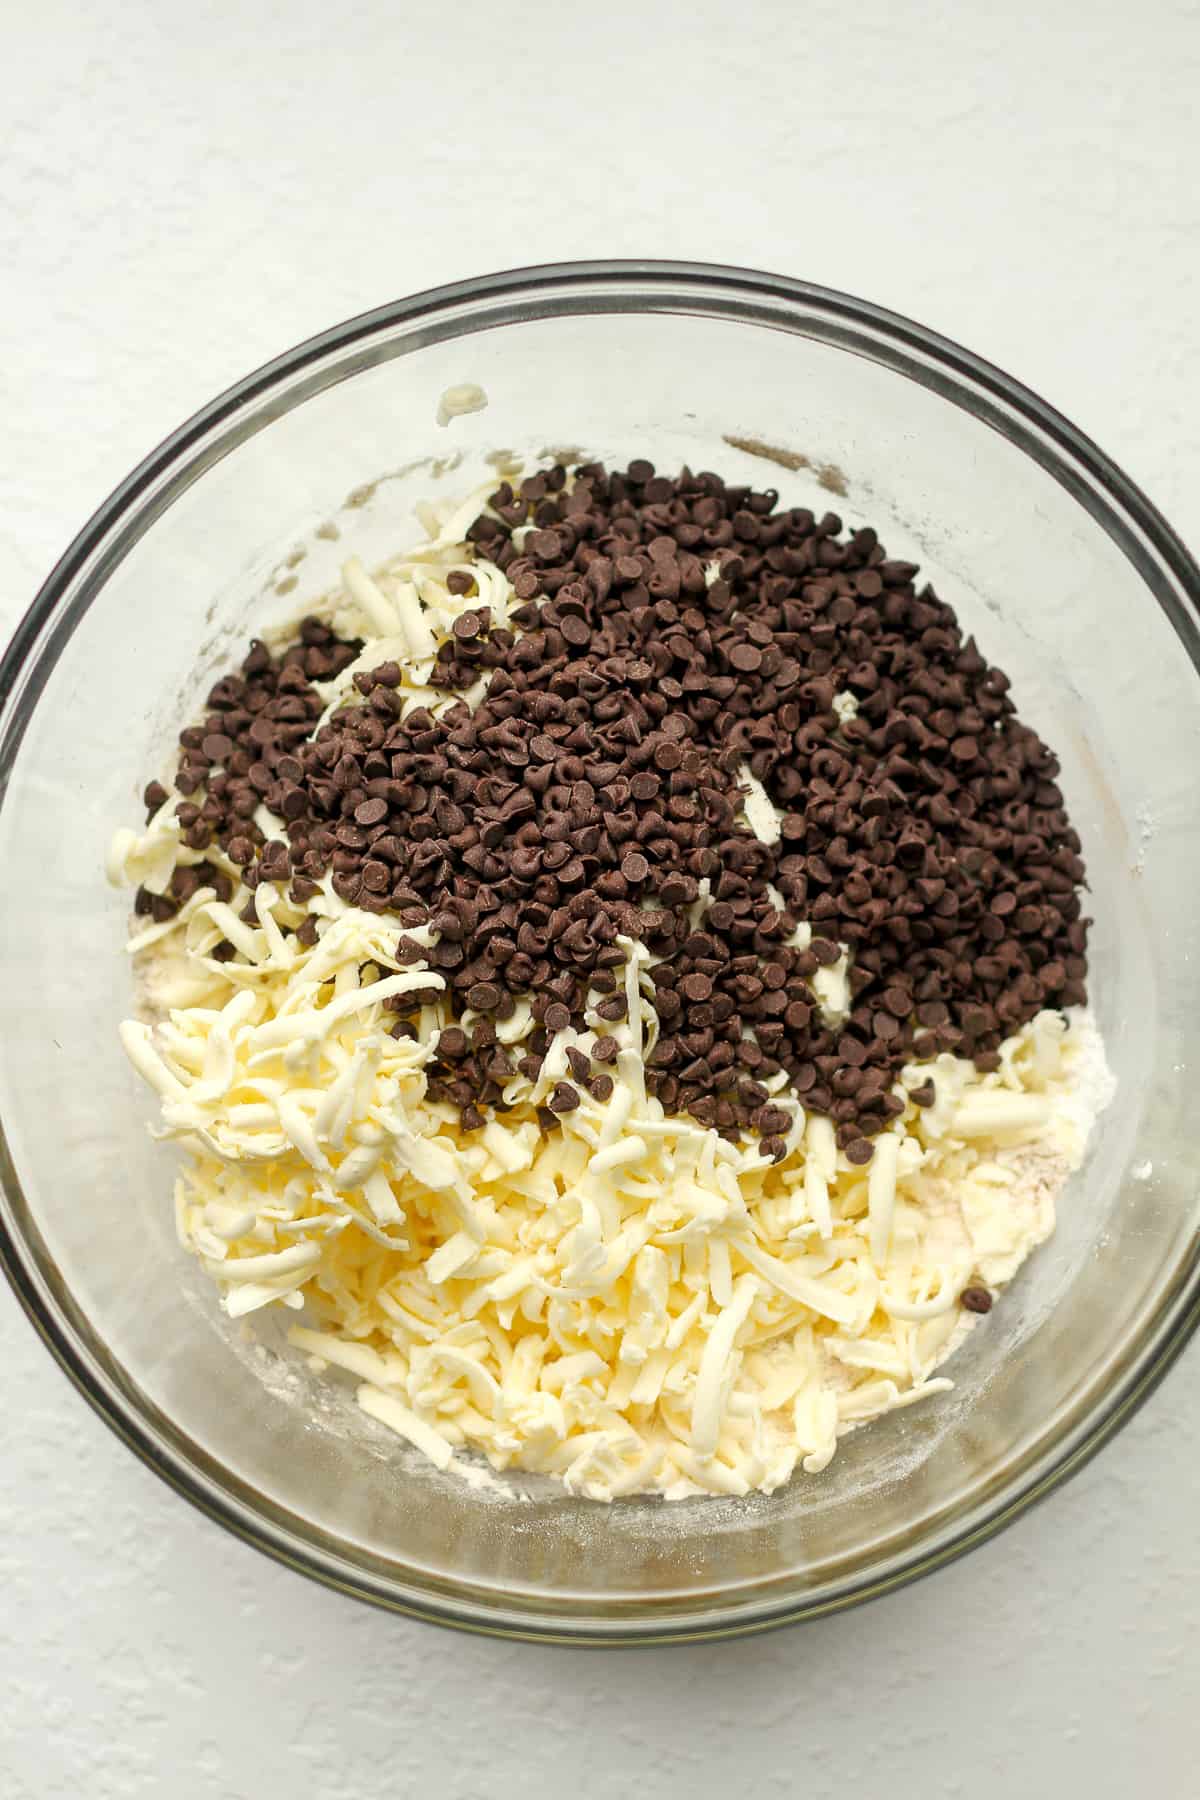 The dry ingredients with the shredded butter and mini chocolate chips on top.